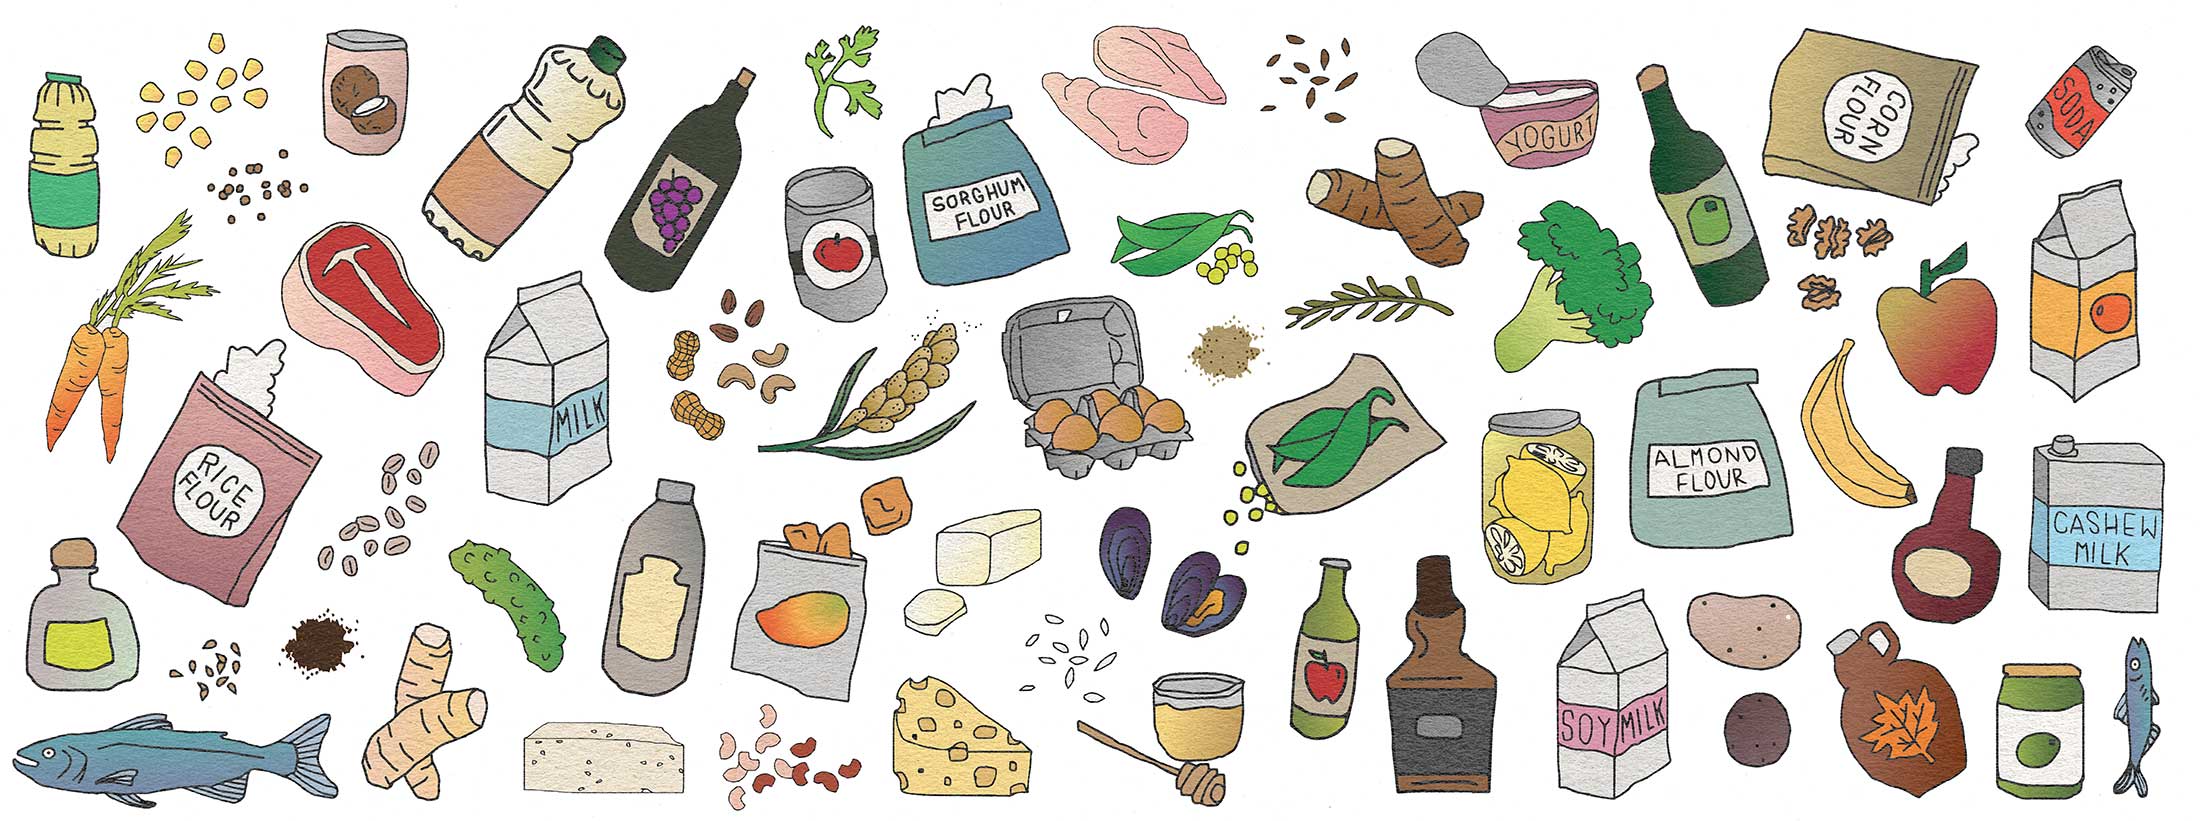 Illustration of a wide range of gluten-free foods, on a white background